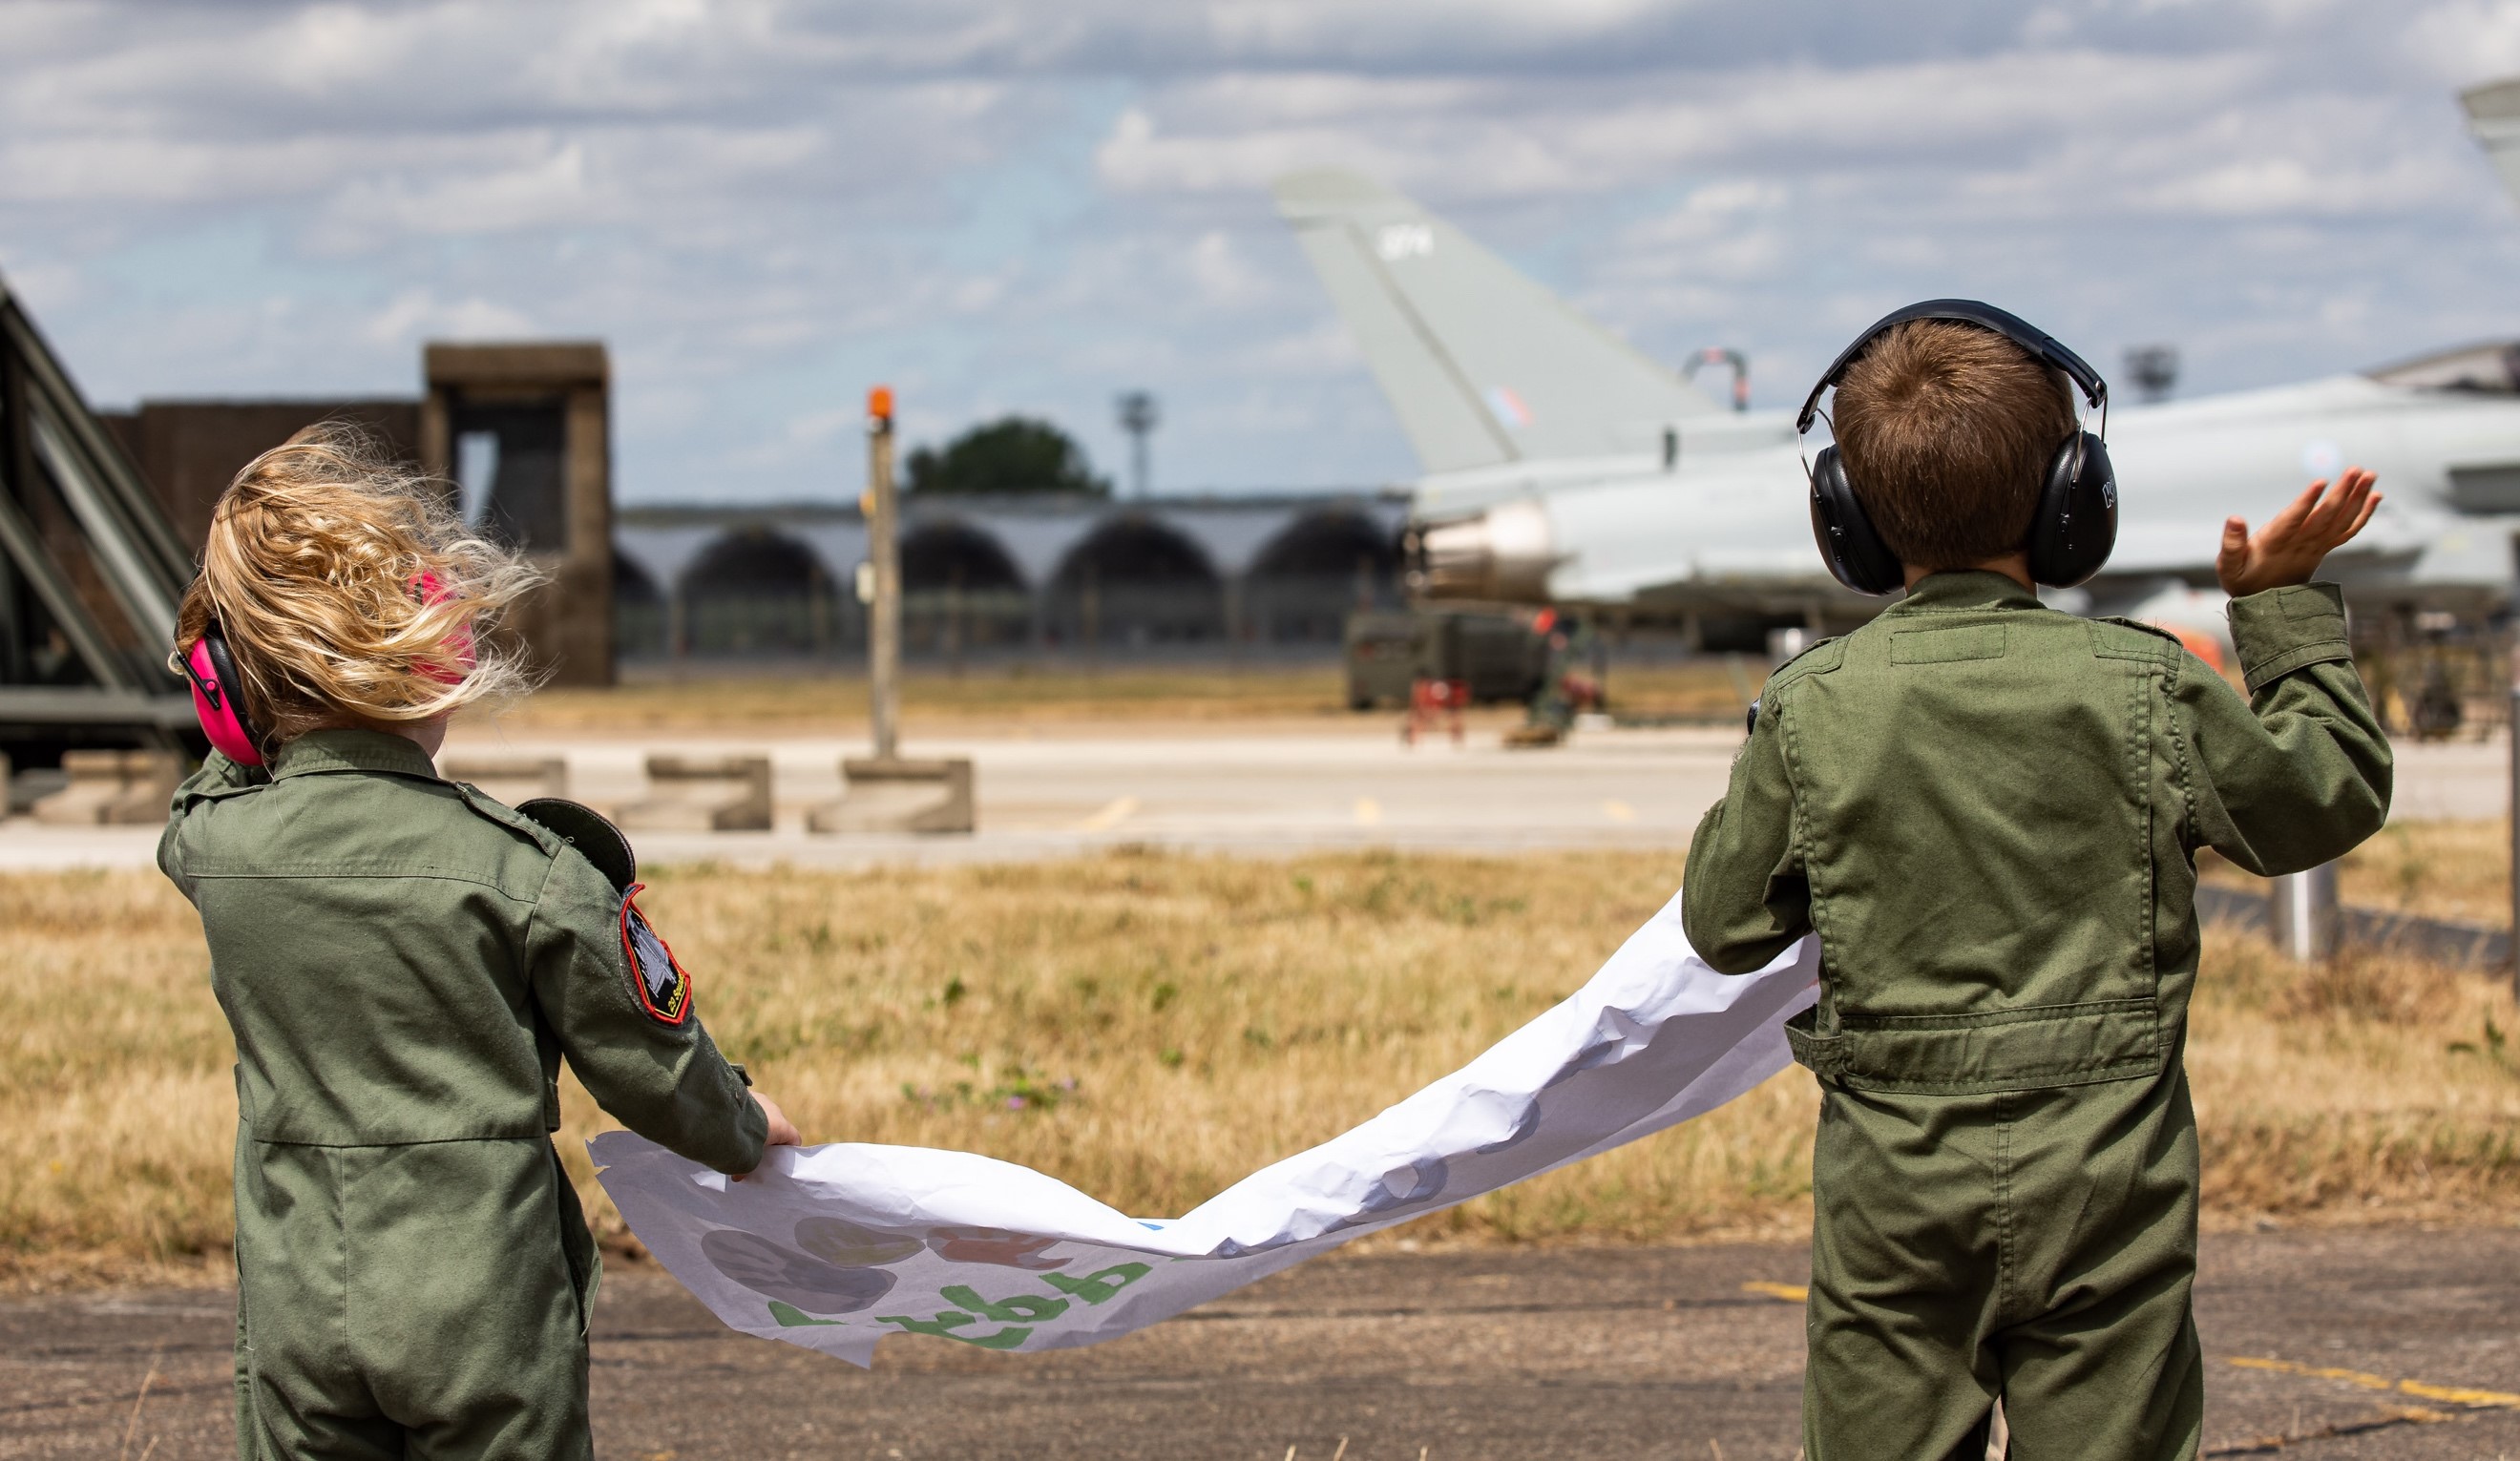 Image shows children waving on the airfield and holding poster.